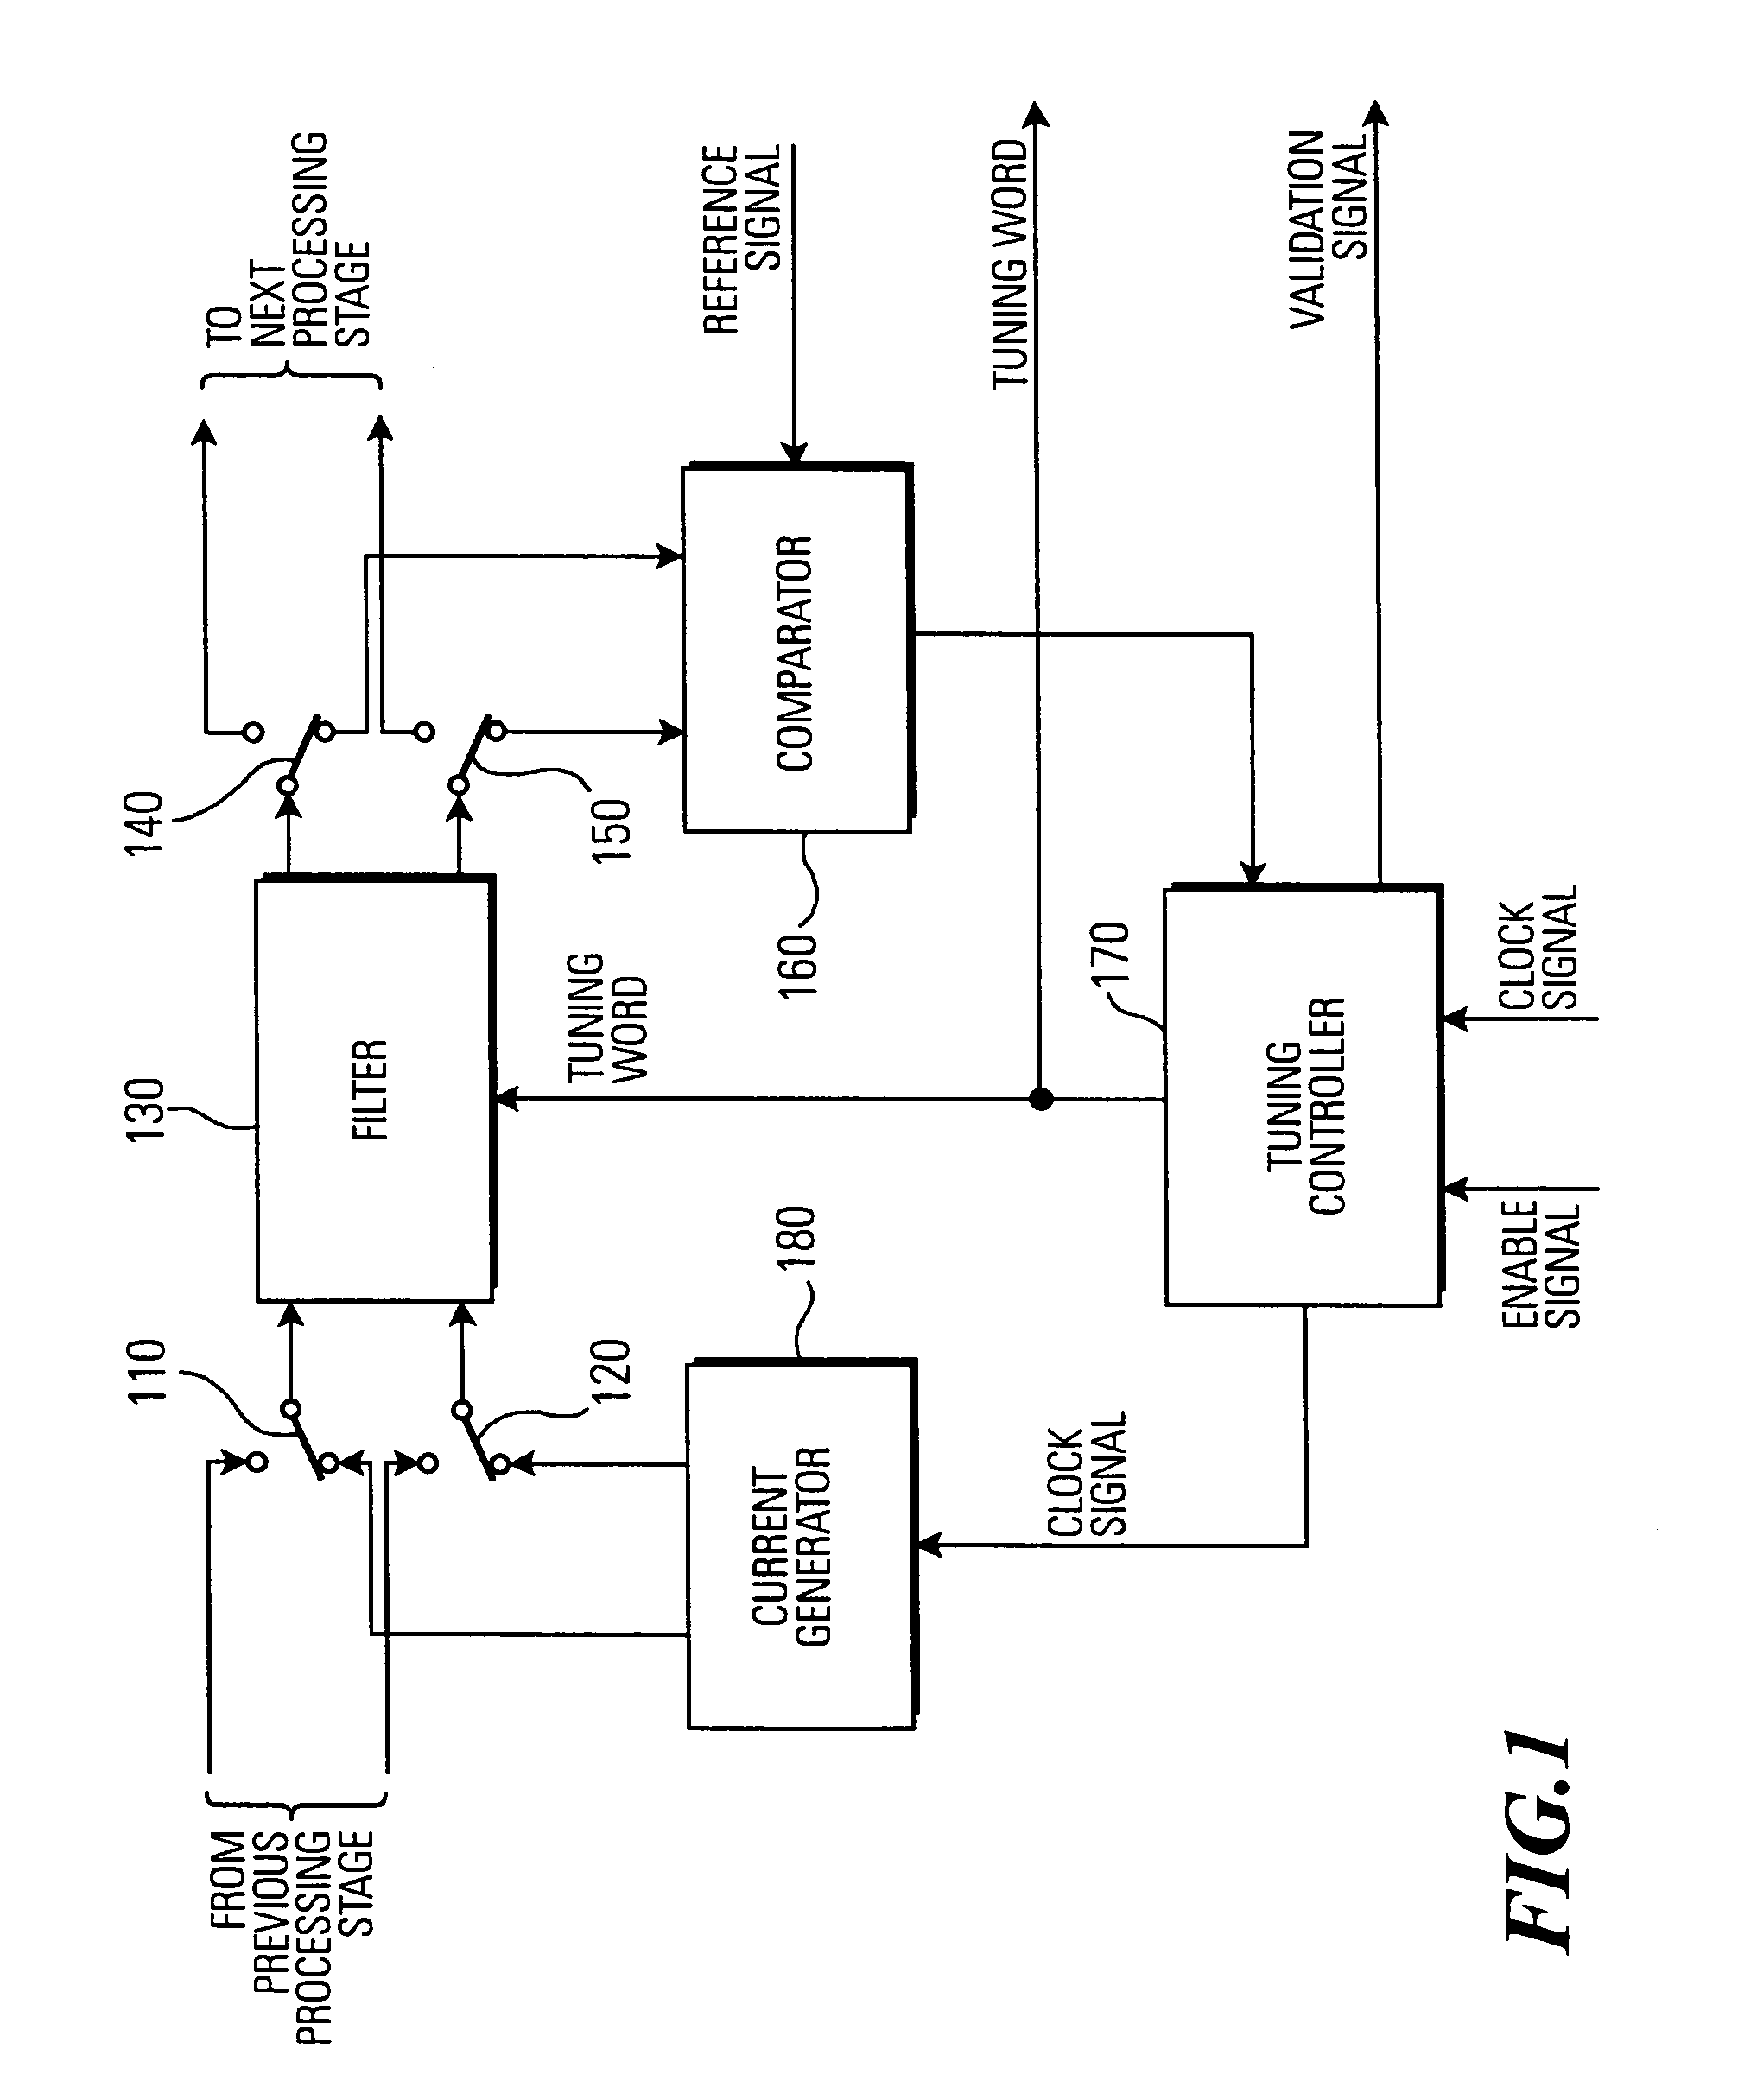 Digitally controlled filter tuning for WLAN communication devices